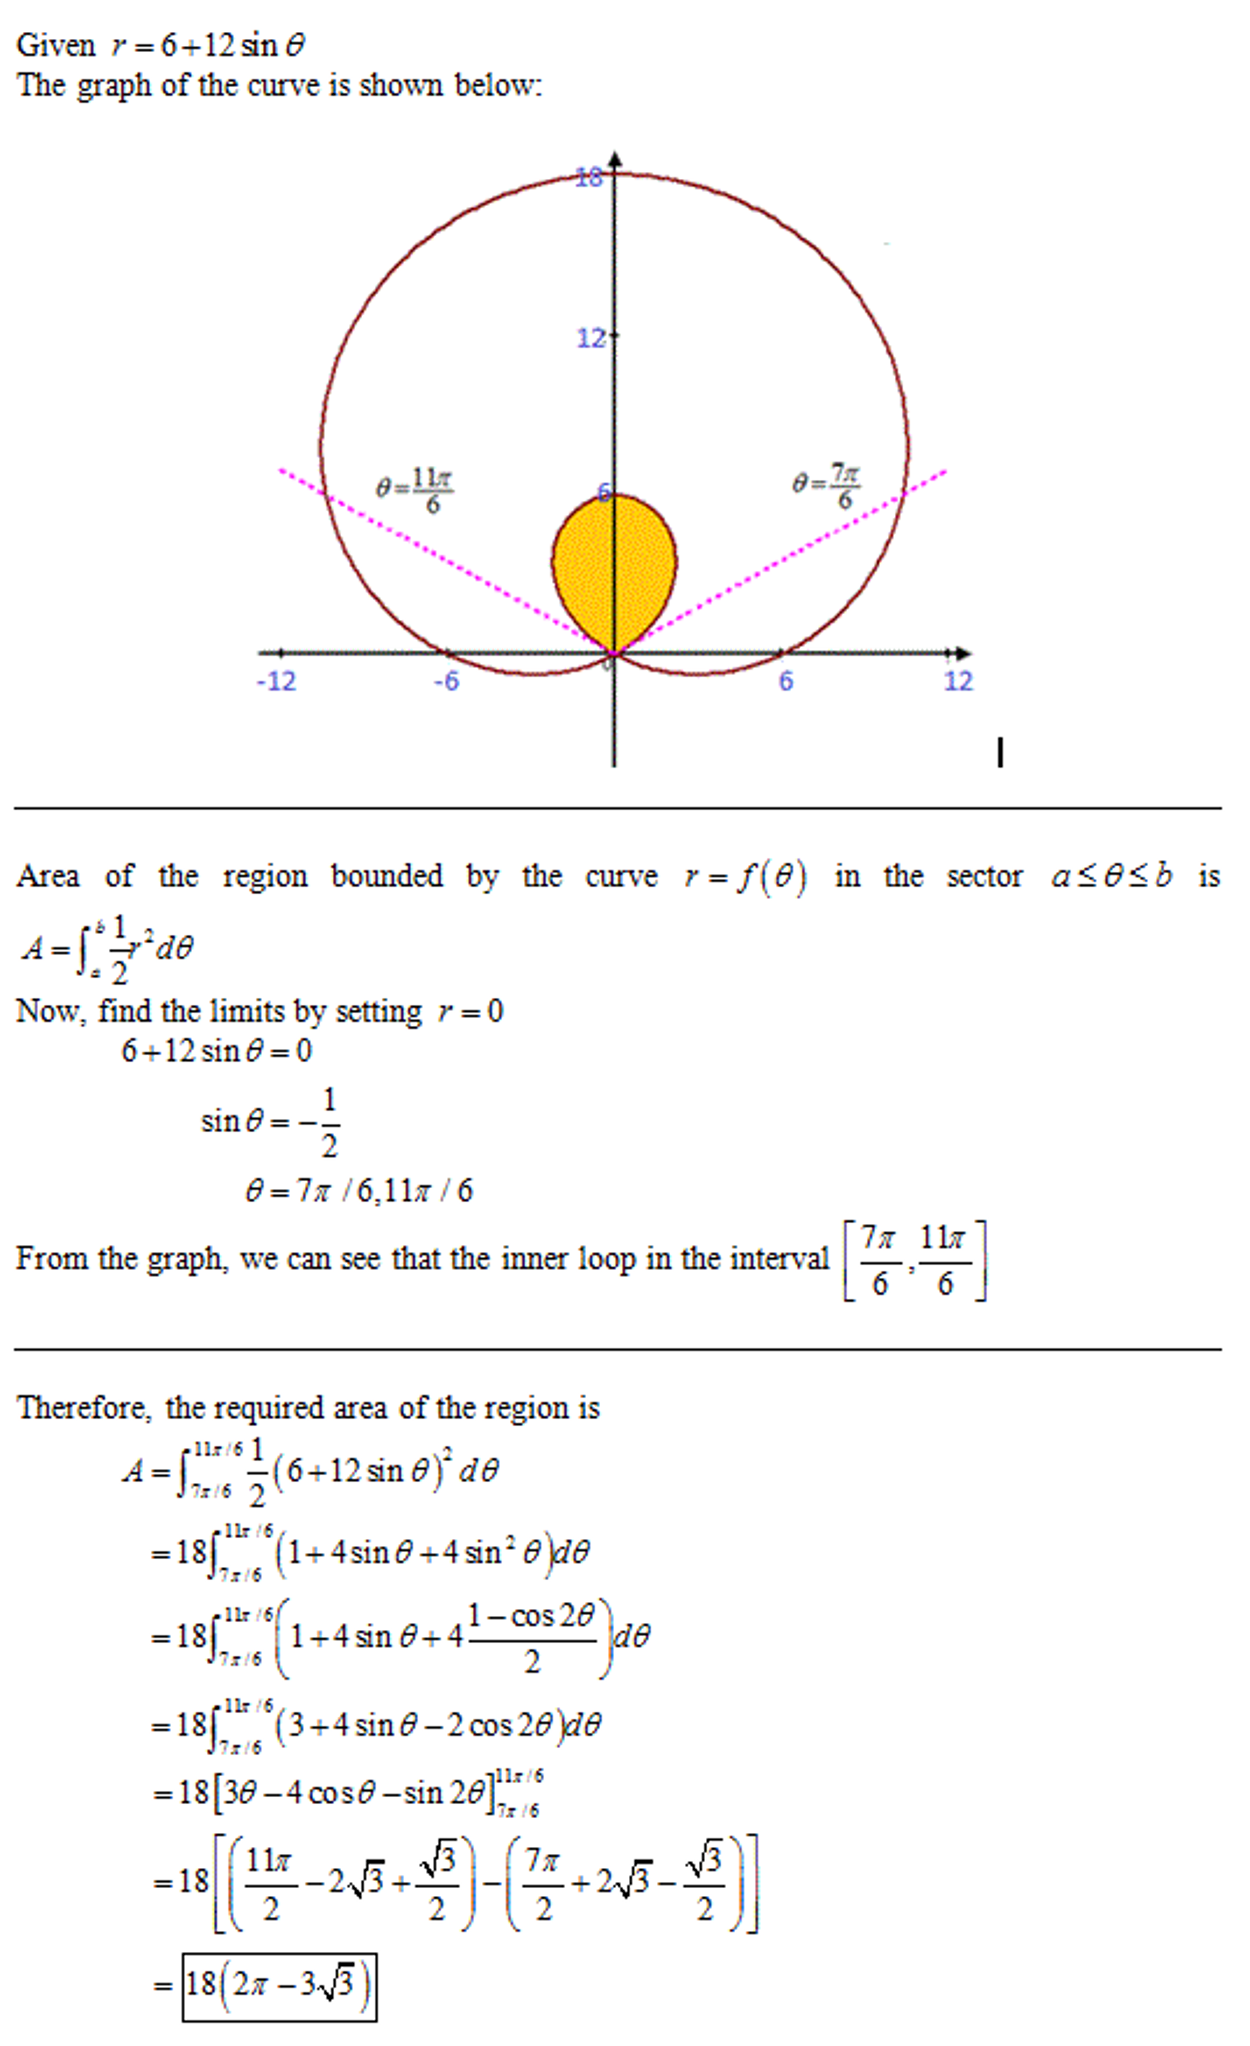 Find the area of the region enclosed by the inner loop of the curve. r = 6 + 12 sin(θ)